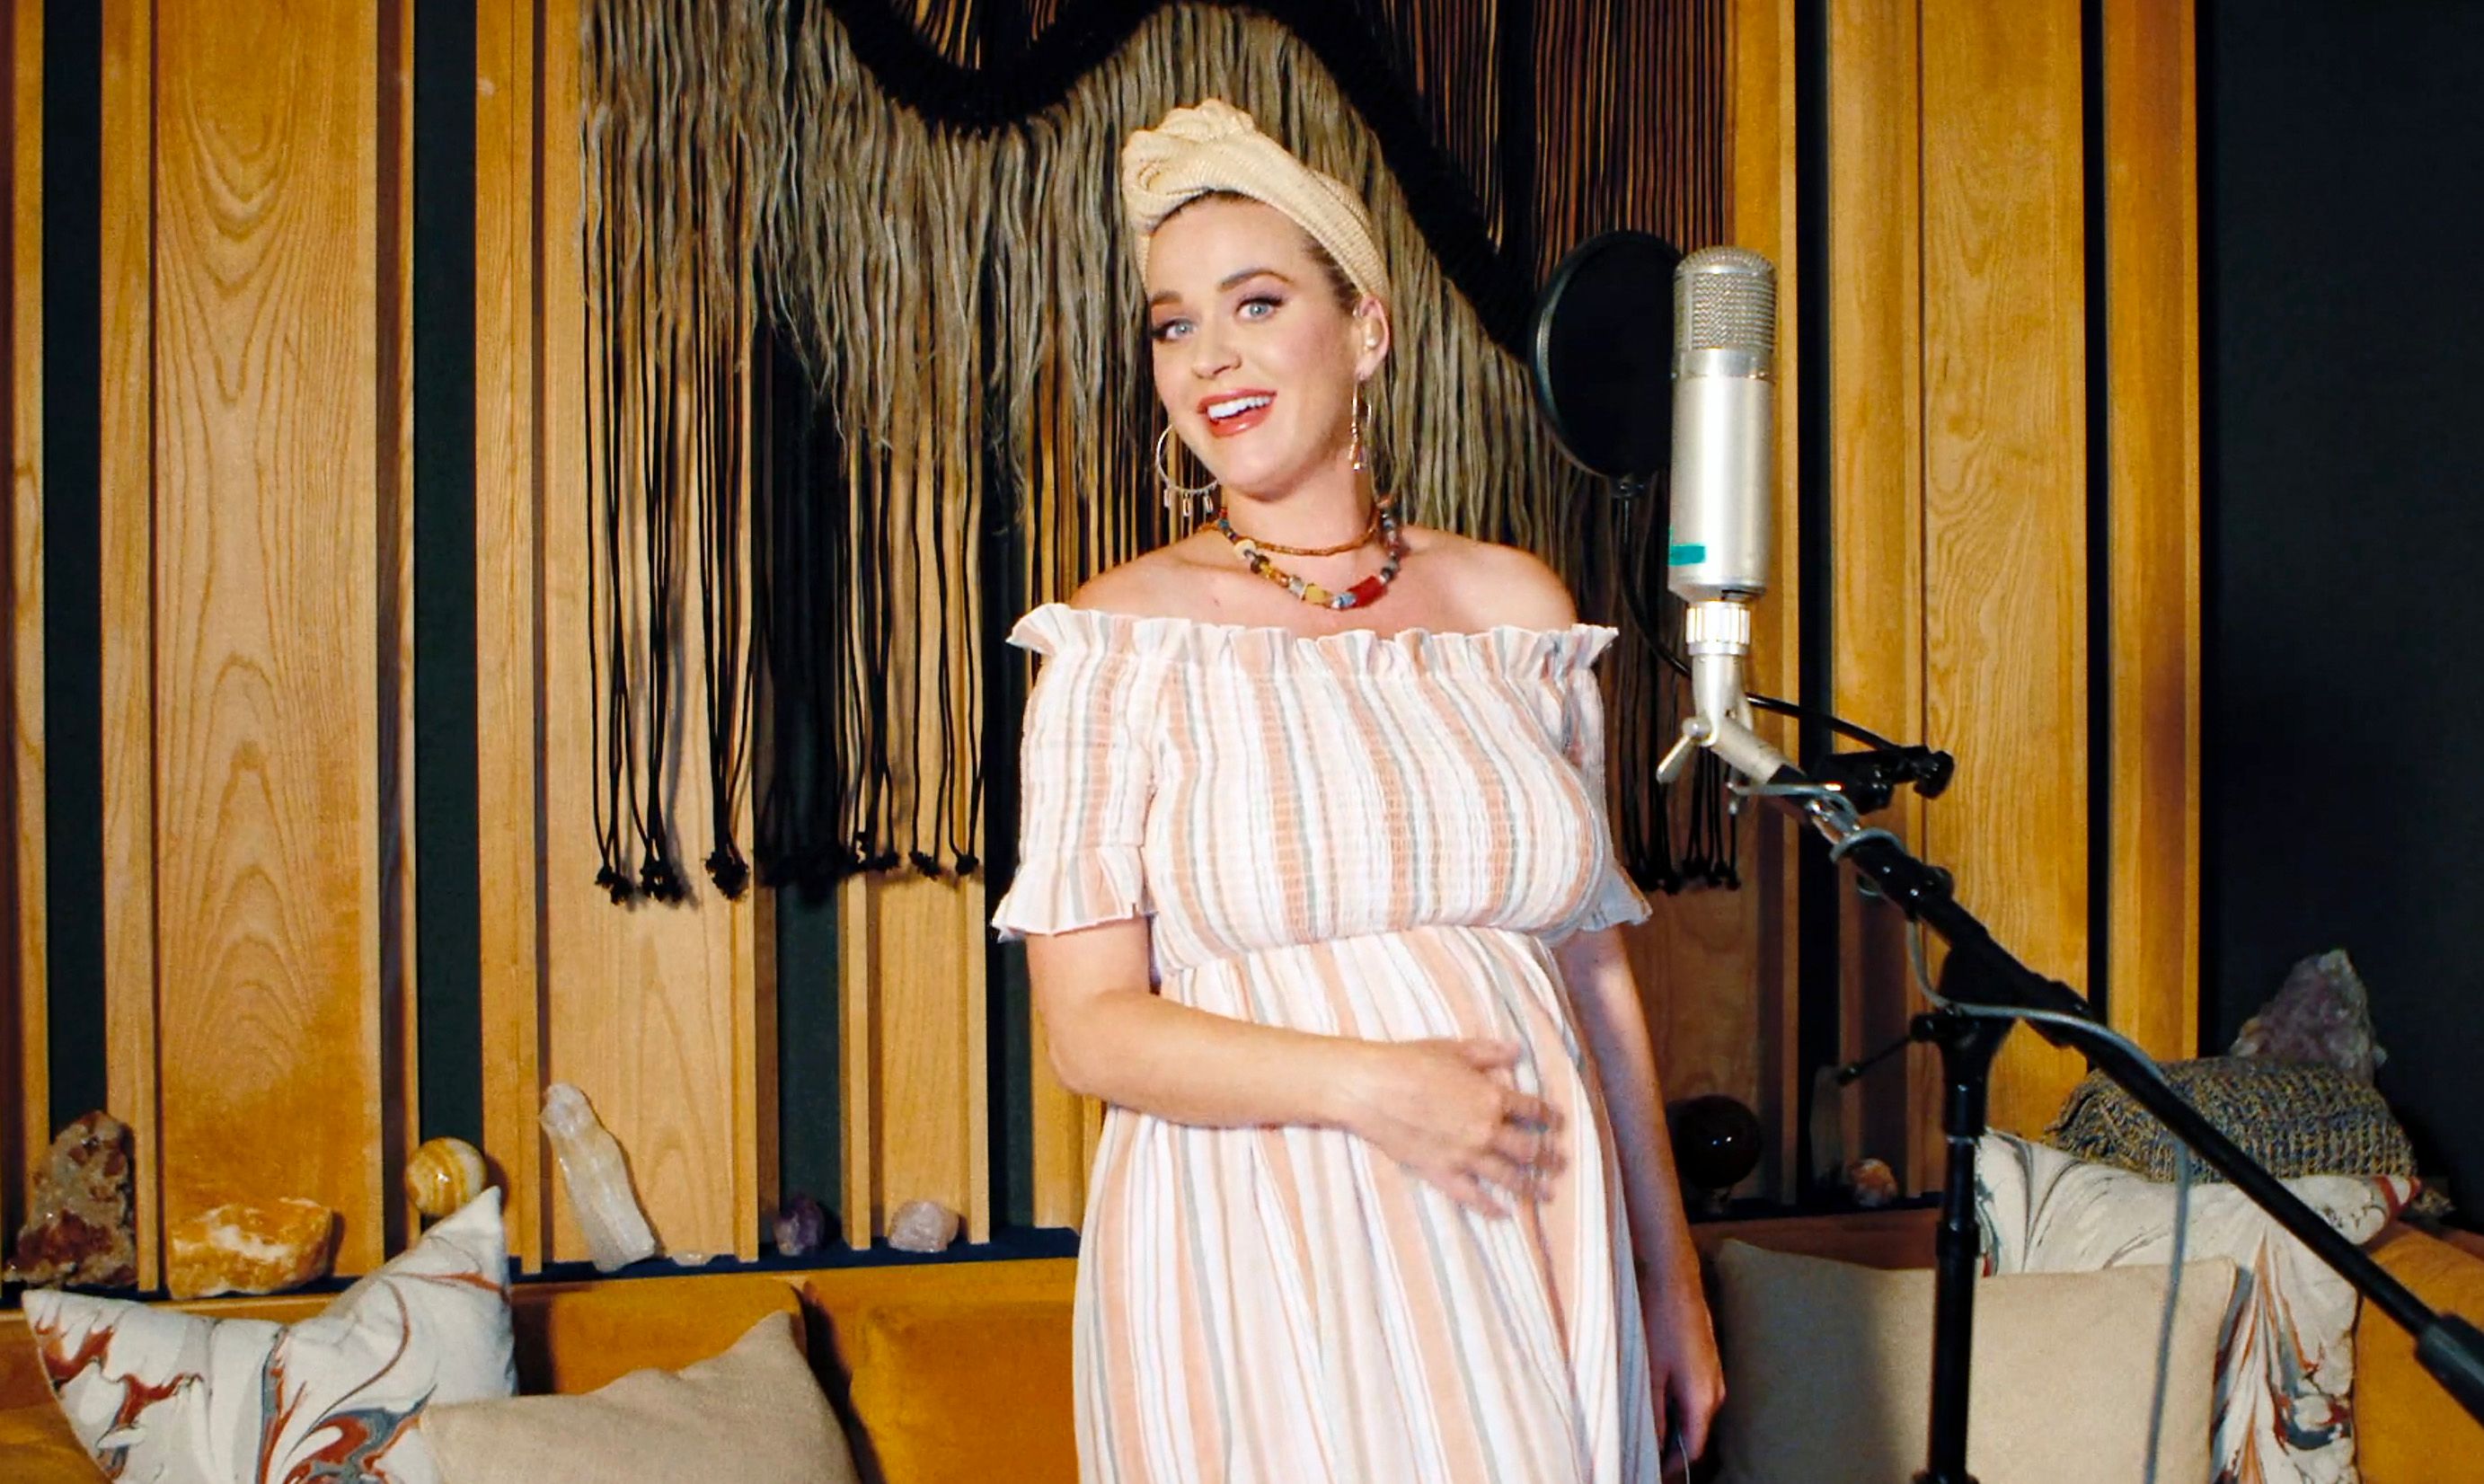 Katy Perry performs during SHEIN Together Virtual Festival to benefit the COVID-19 Solidarity Response Fund for WHO powered by the United Nations Foundation on May 09, 2020. | Source: Getty Images